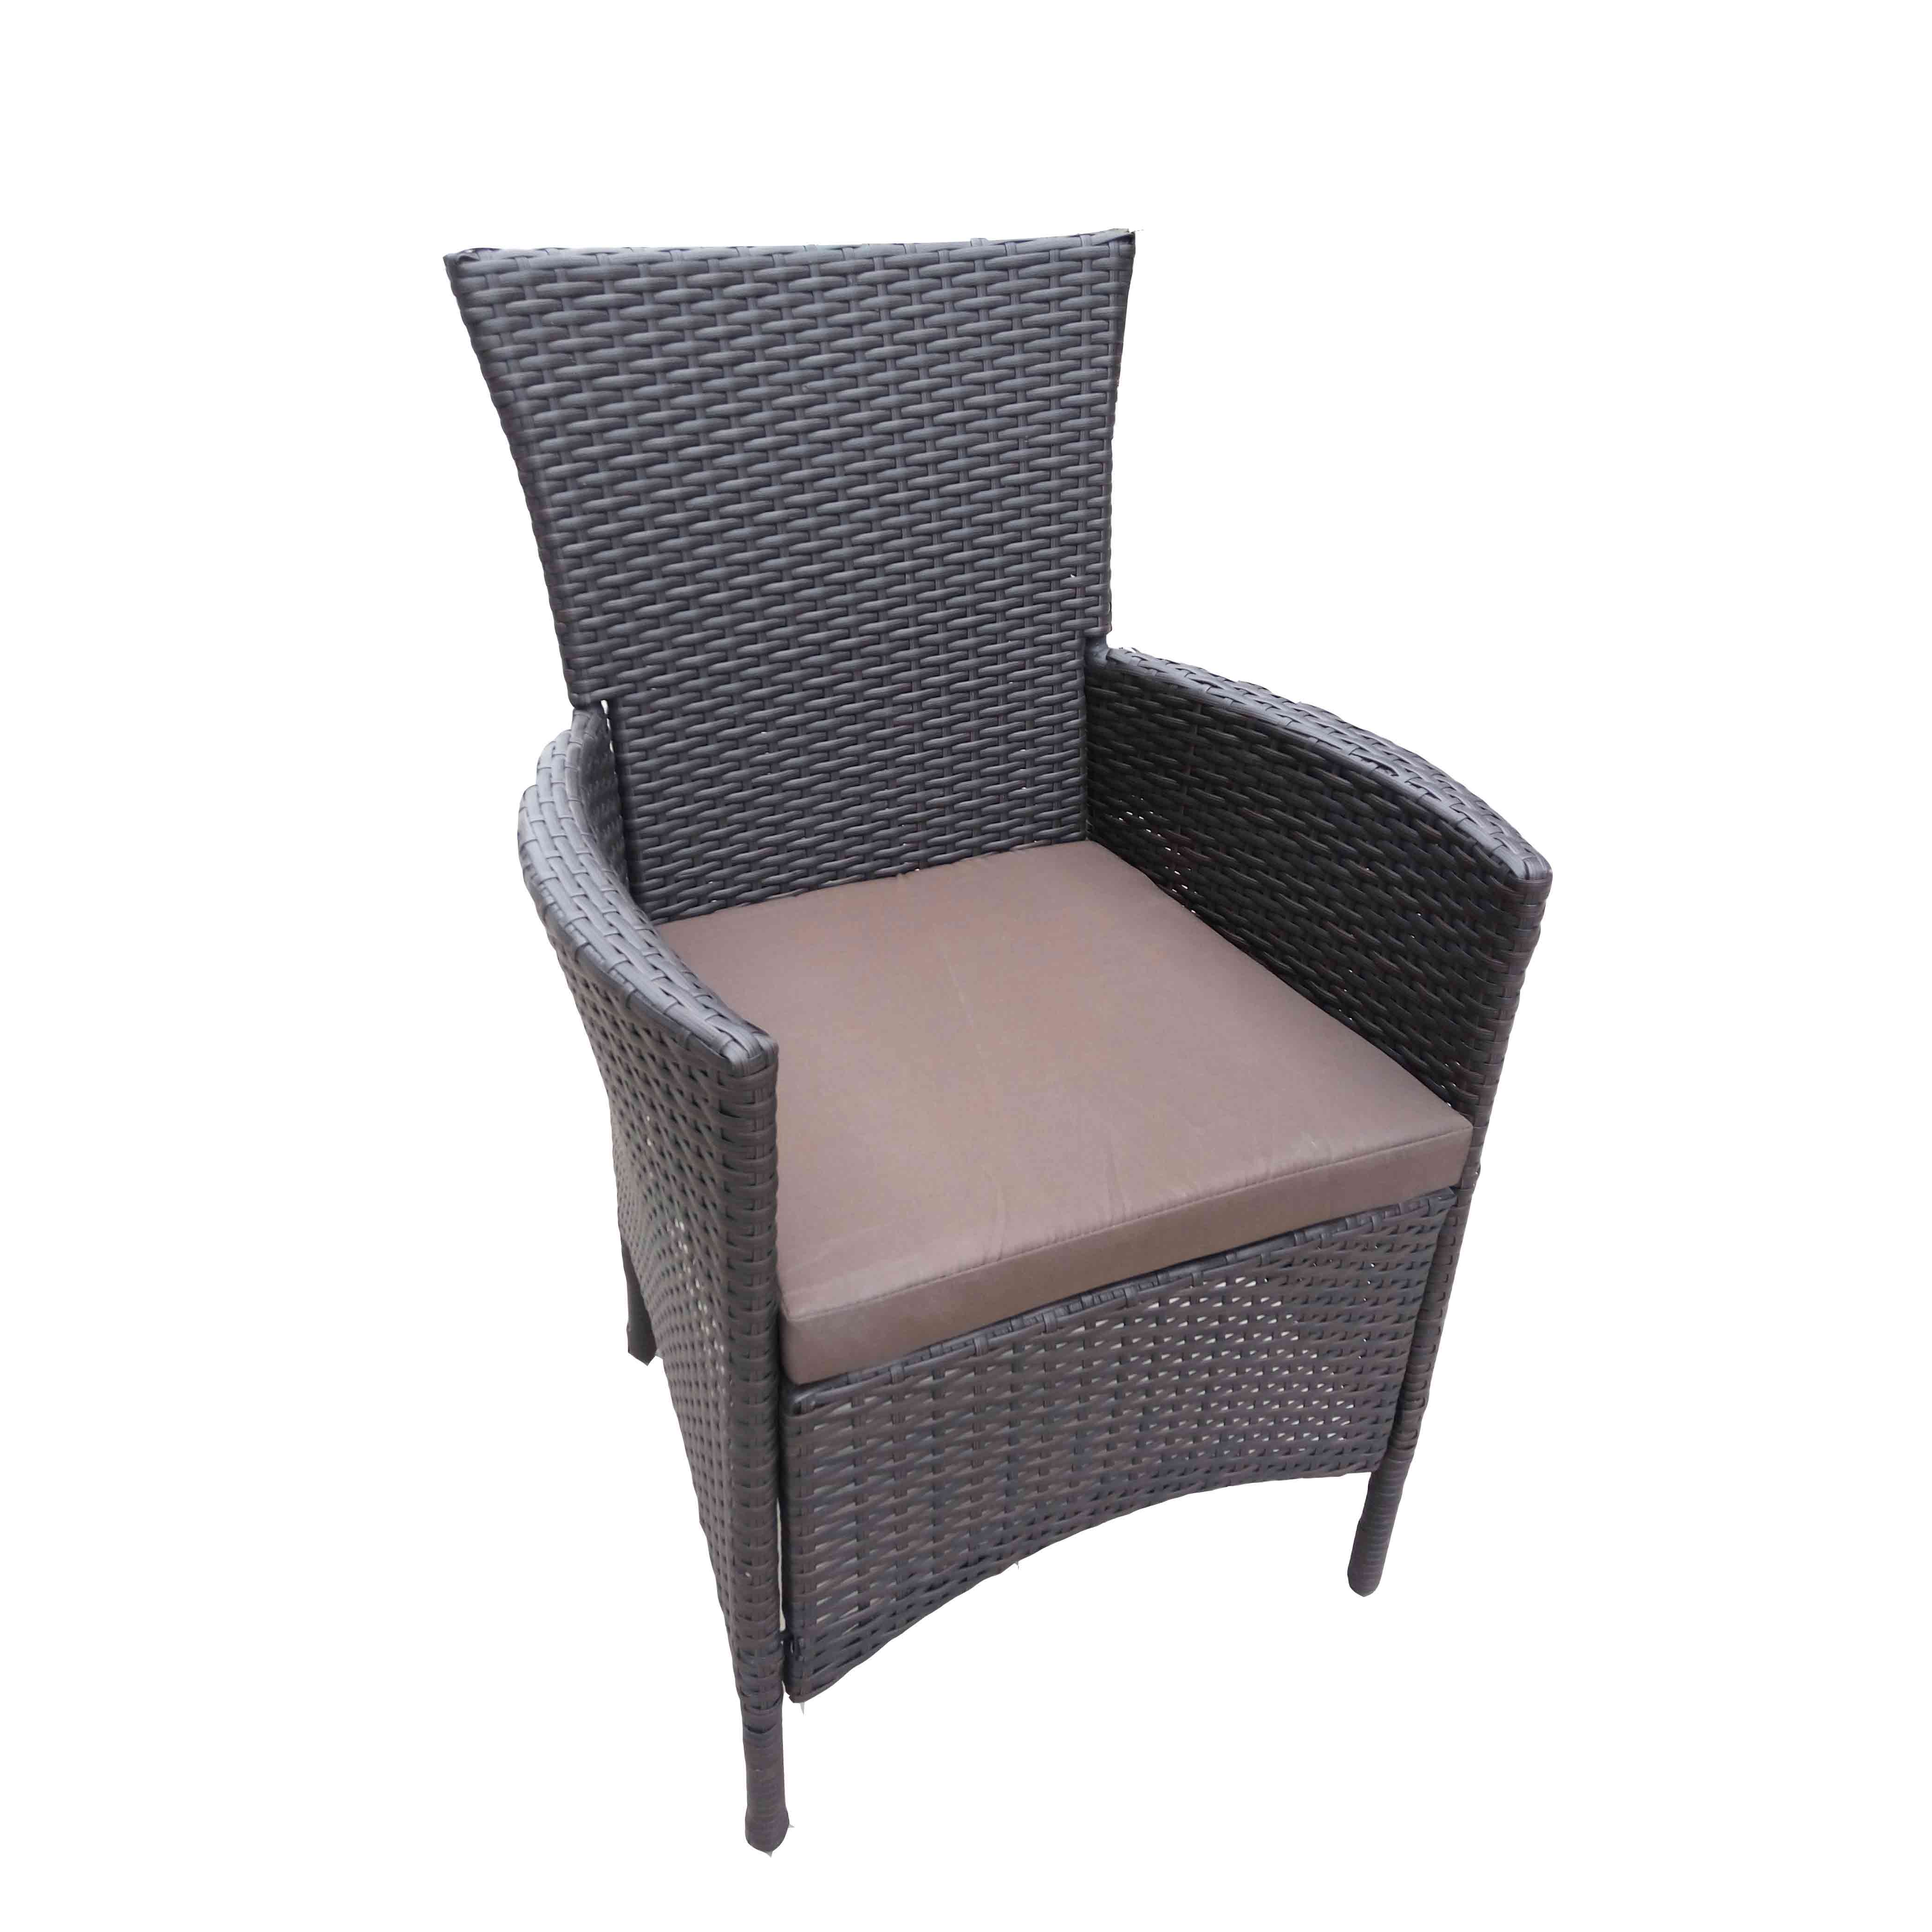 18 Years Factory Metal Stackable Outdoor Chair - JJC3005 Steel Frame Stacking Wicker dinning Chair – Jin-jiang Industry